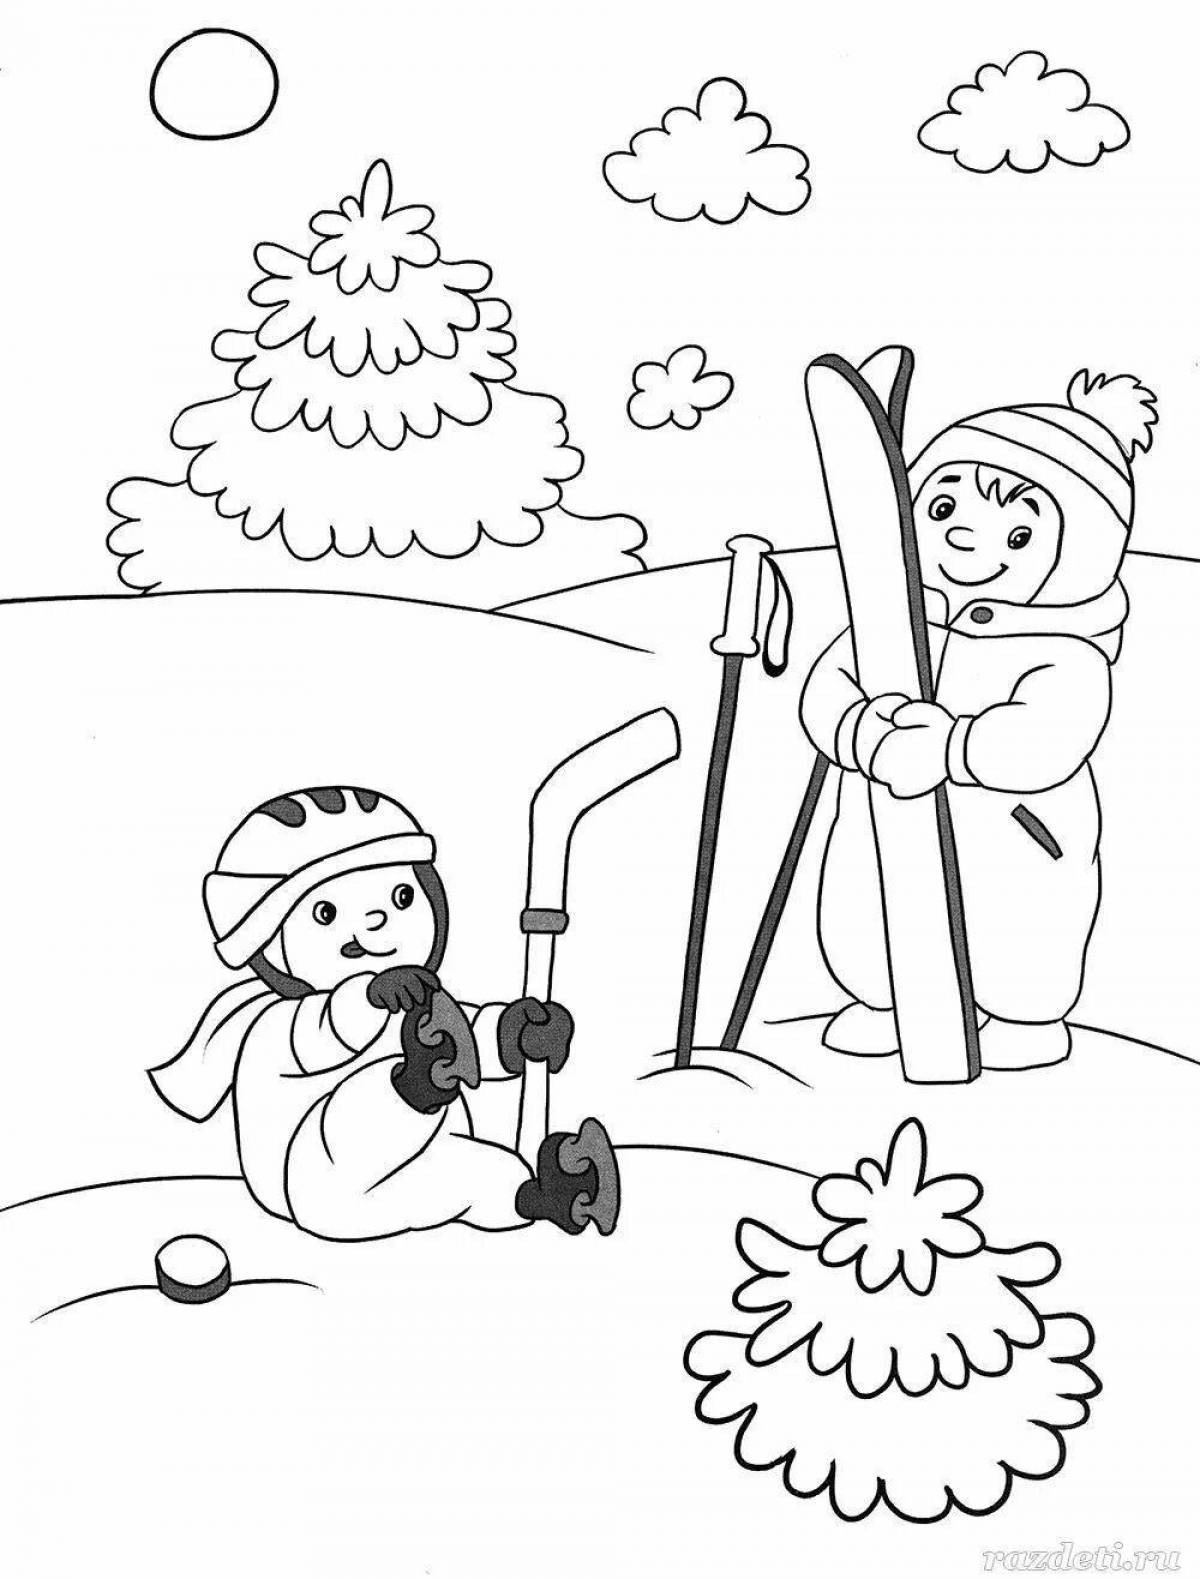 Sparkling Winter Fun coloring page